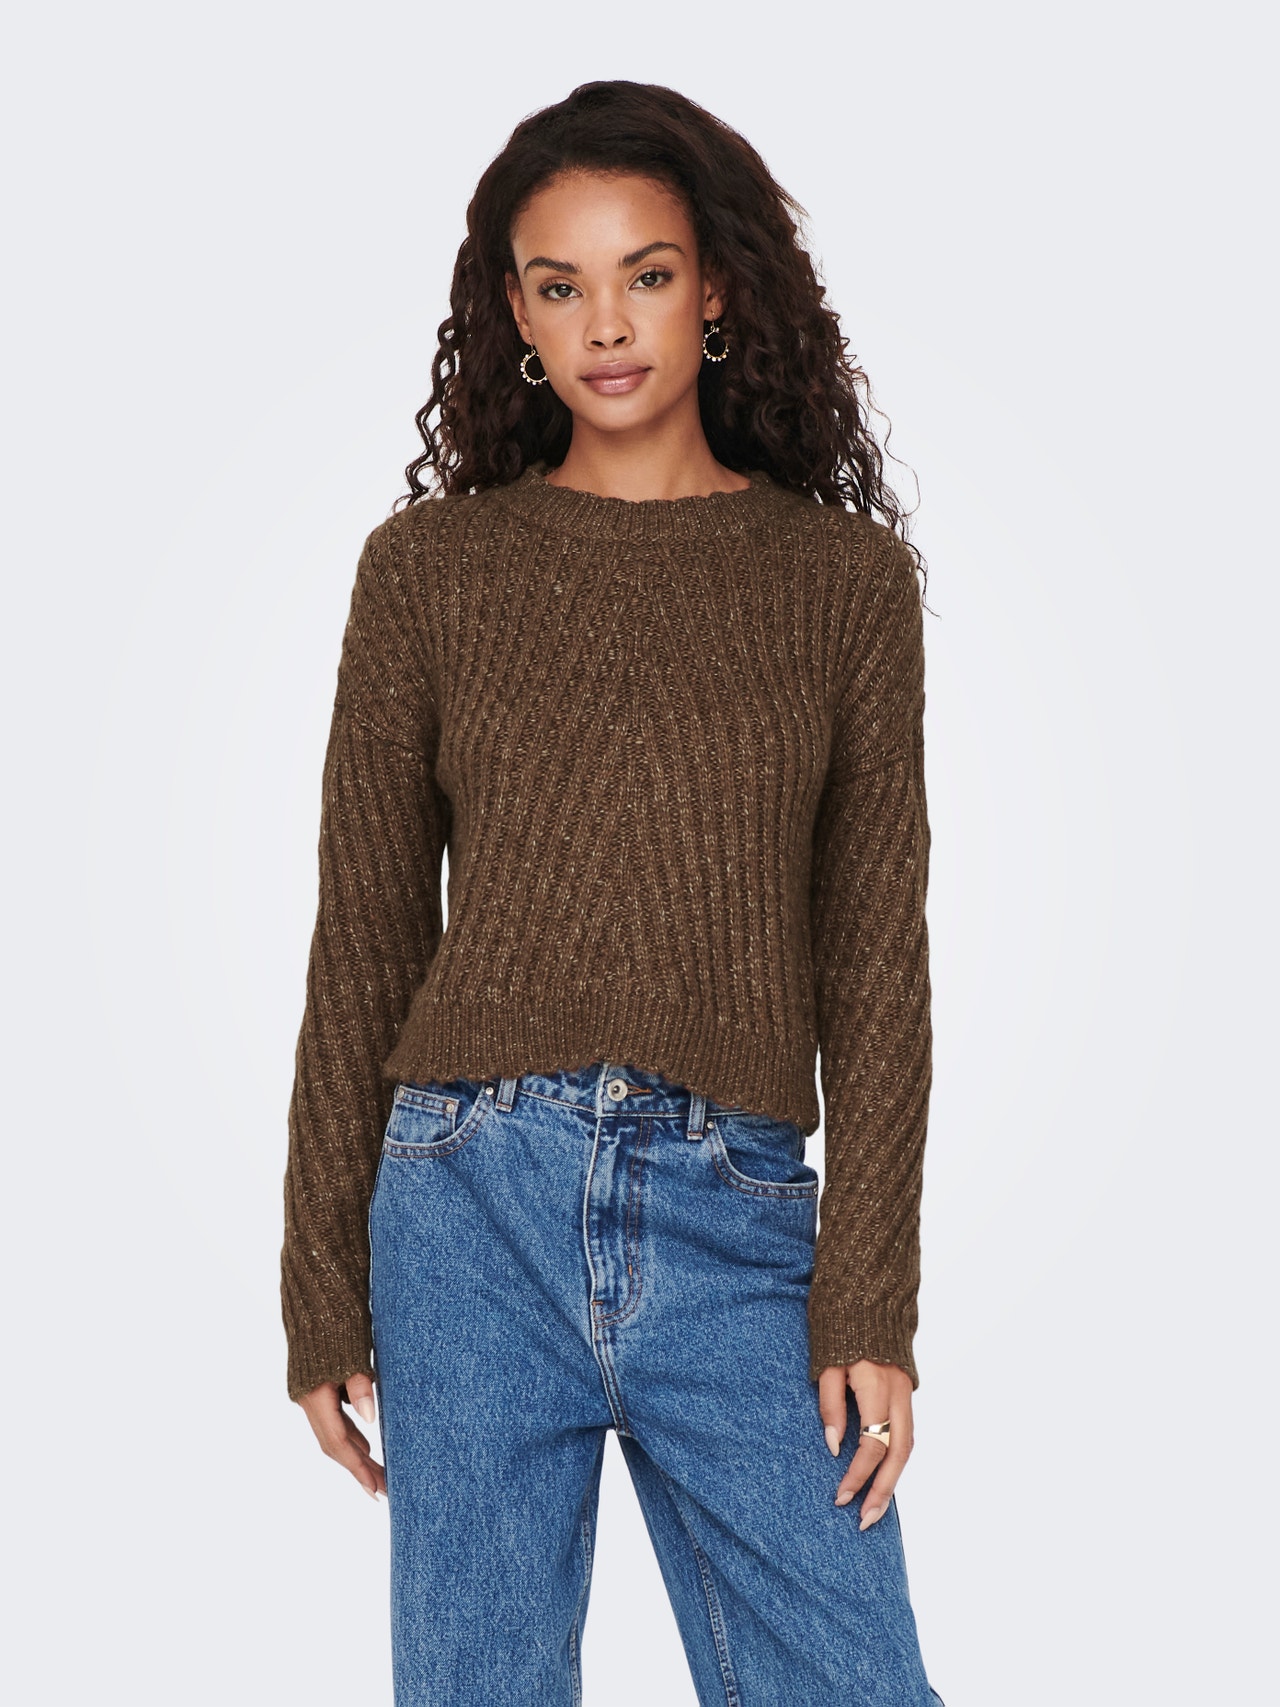 ONLY Round Neck Pullover -Potting Soil - 15269070